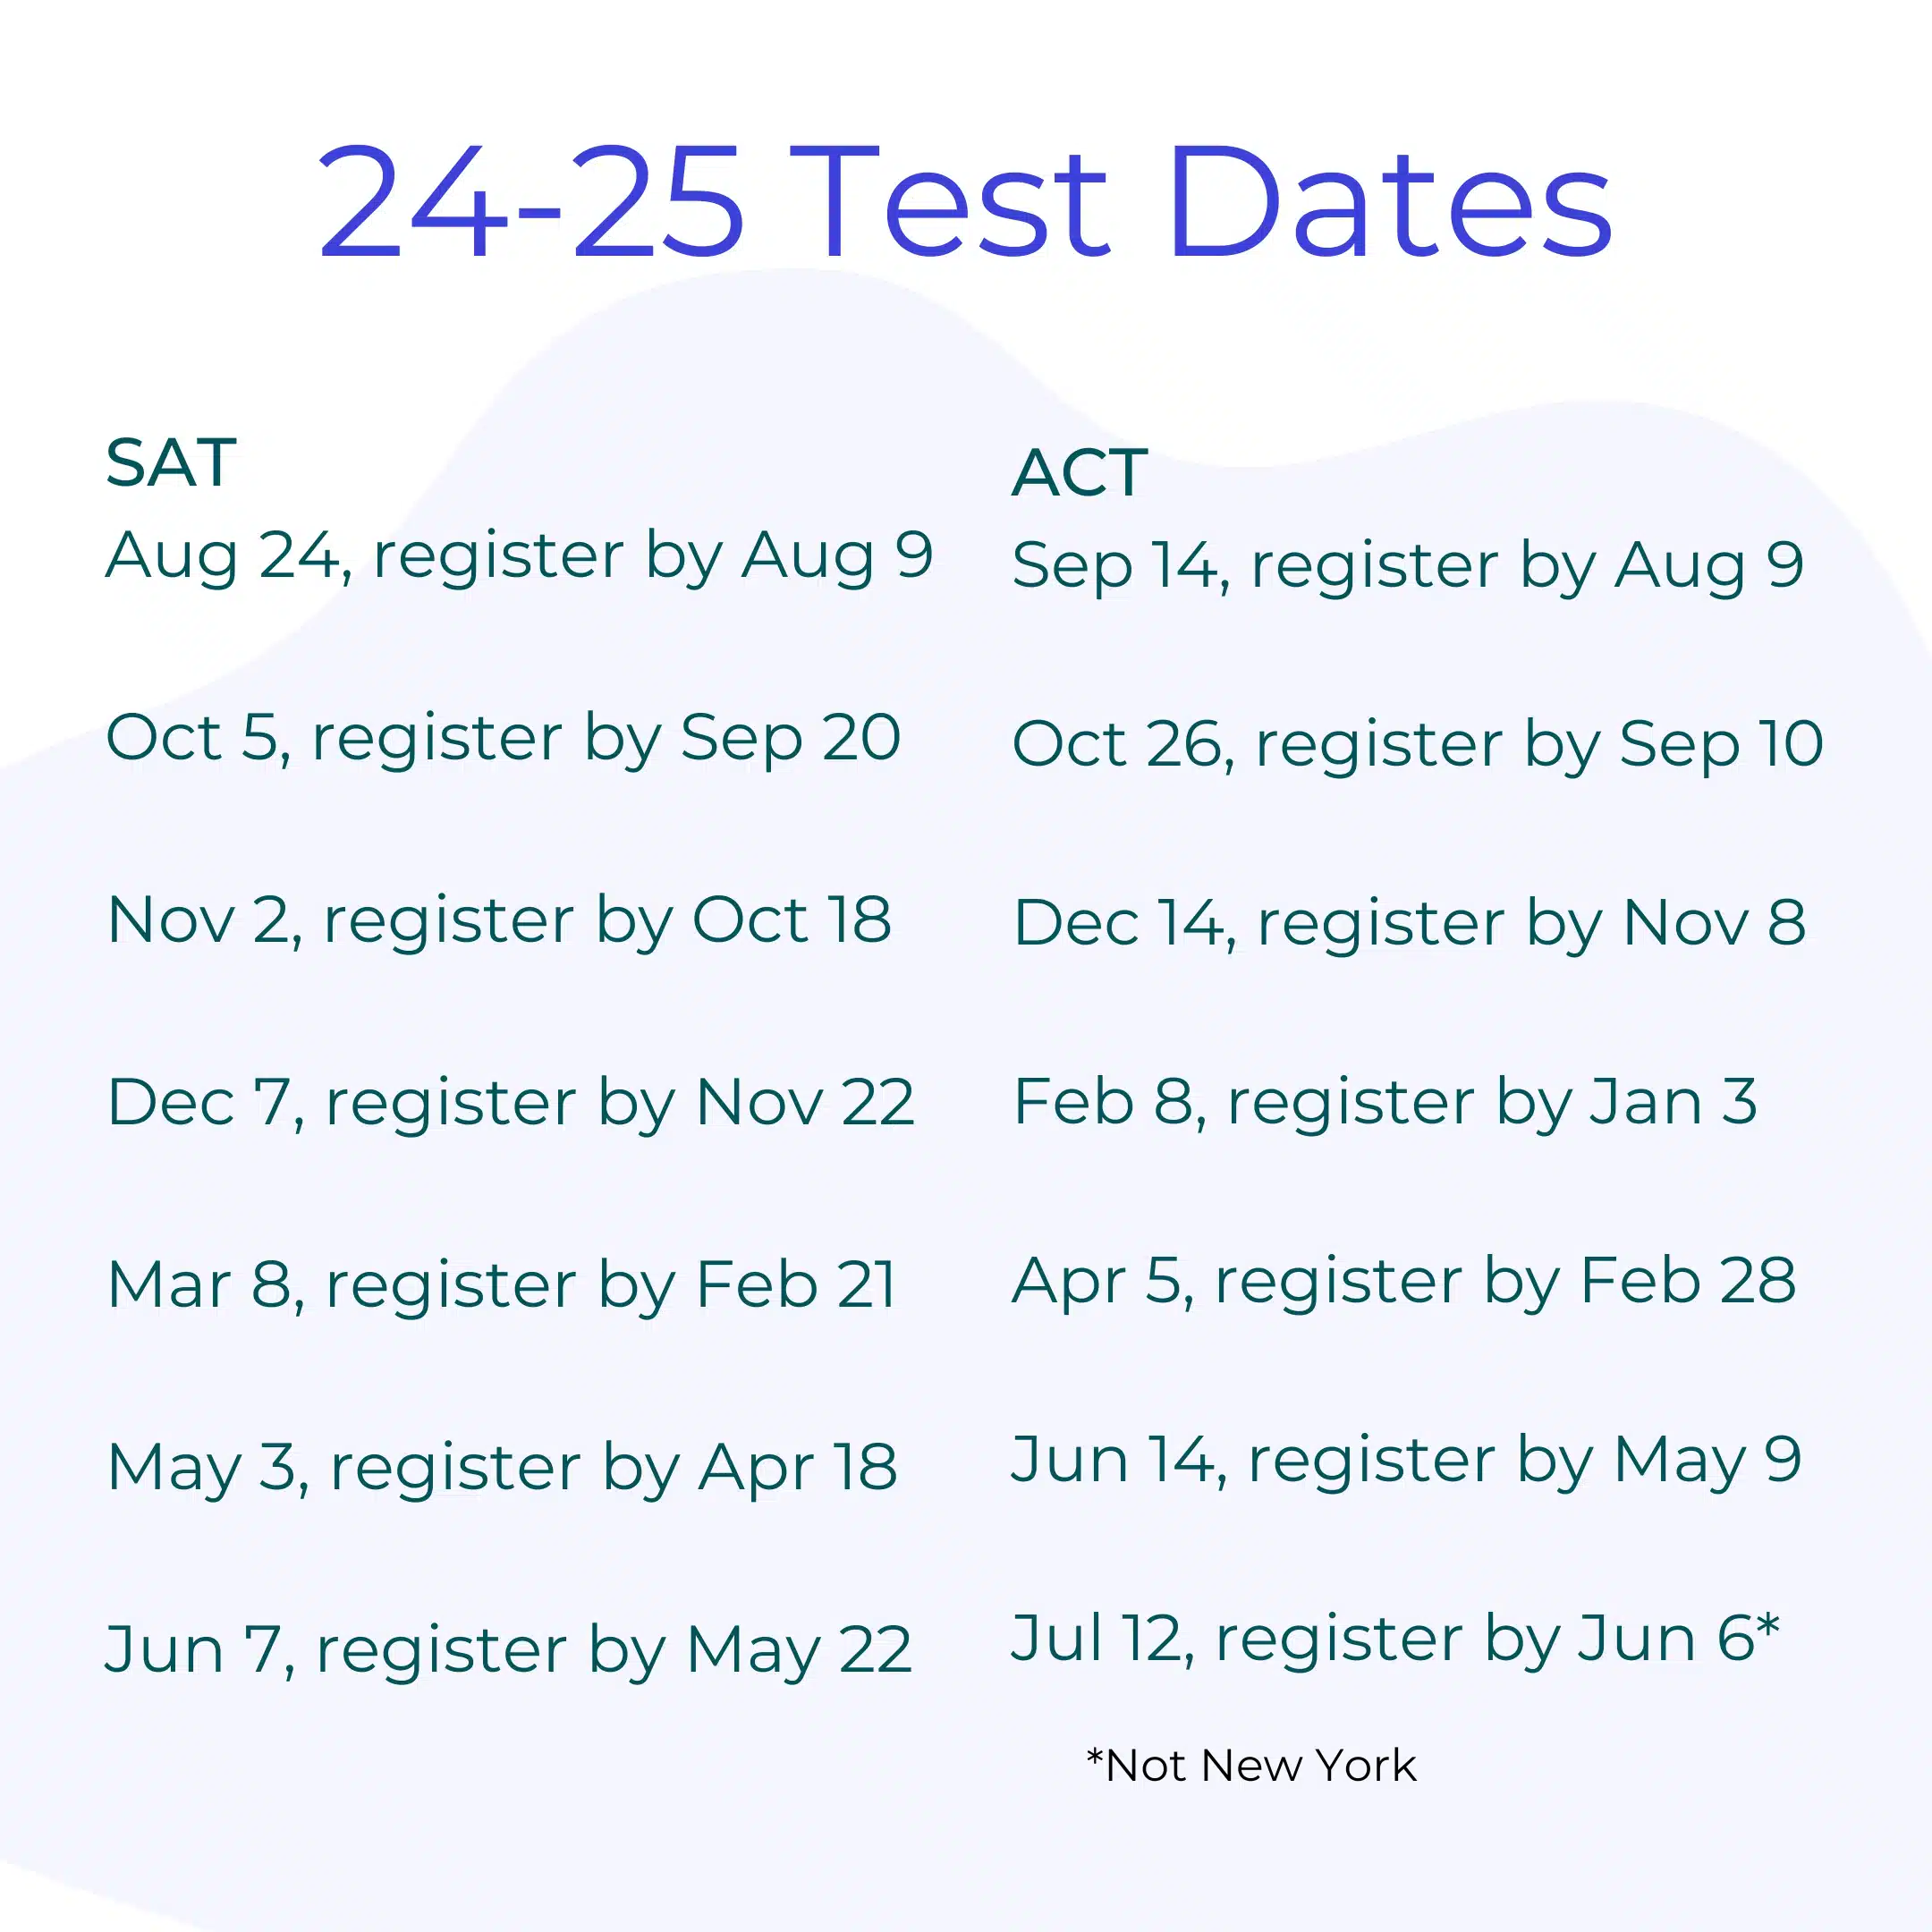 sat and act test